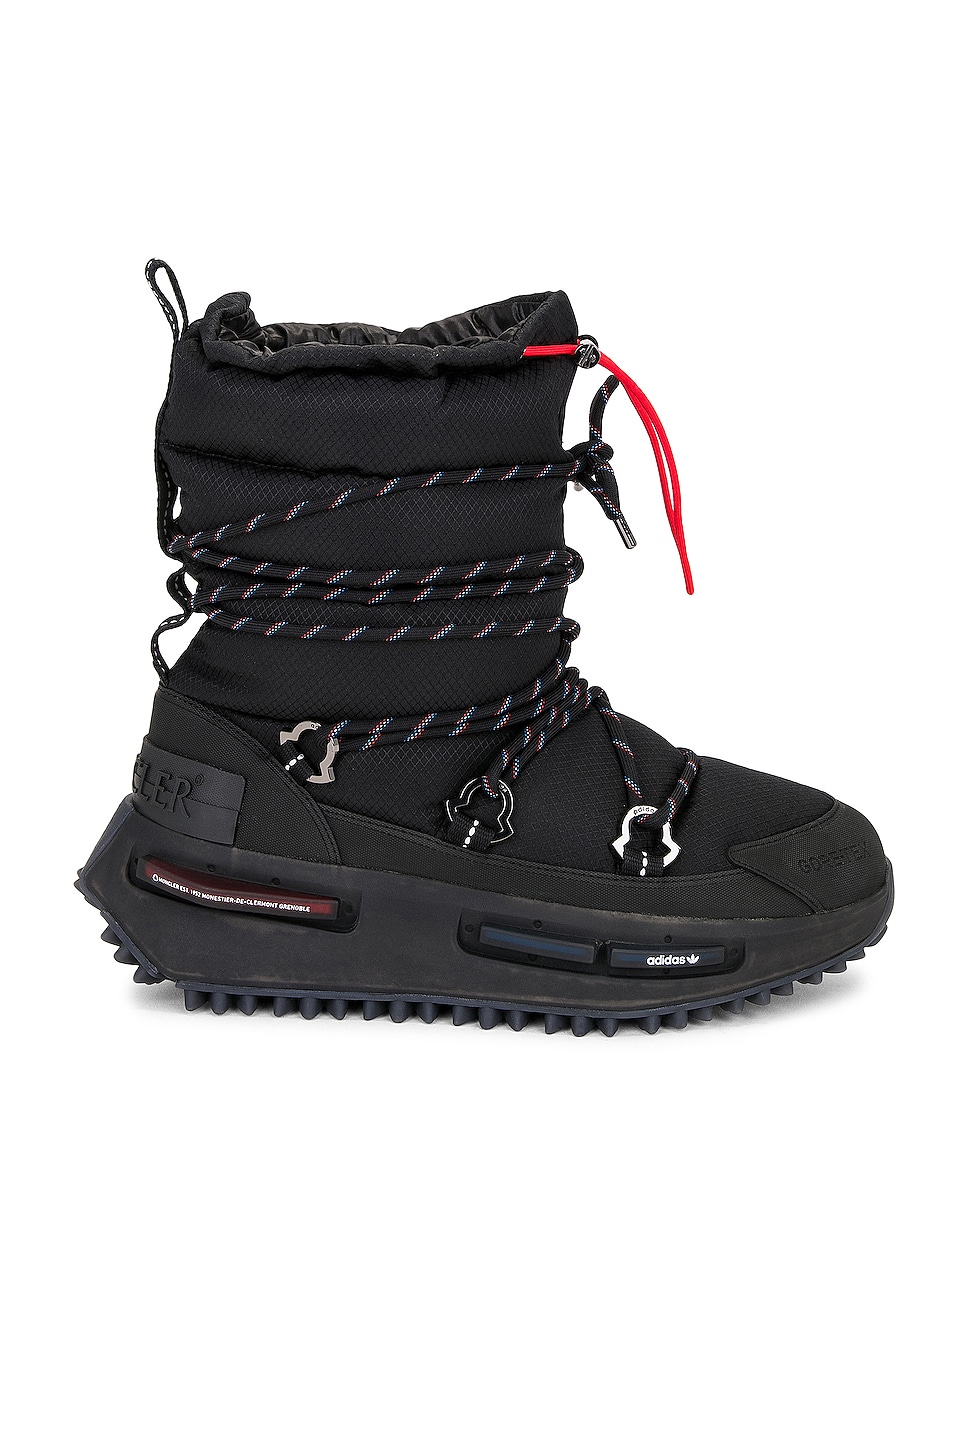 Moncler Genius x Adidas NMD Mid Ankle Boots in Black | FWRD